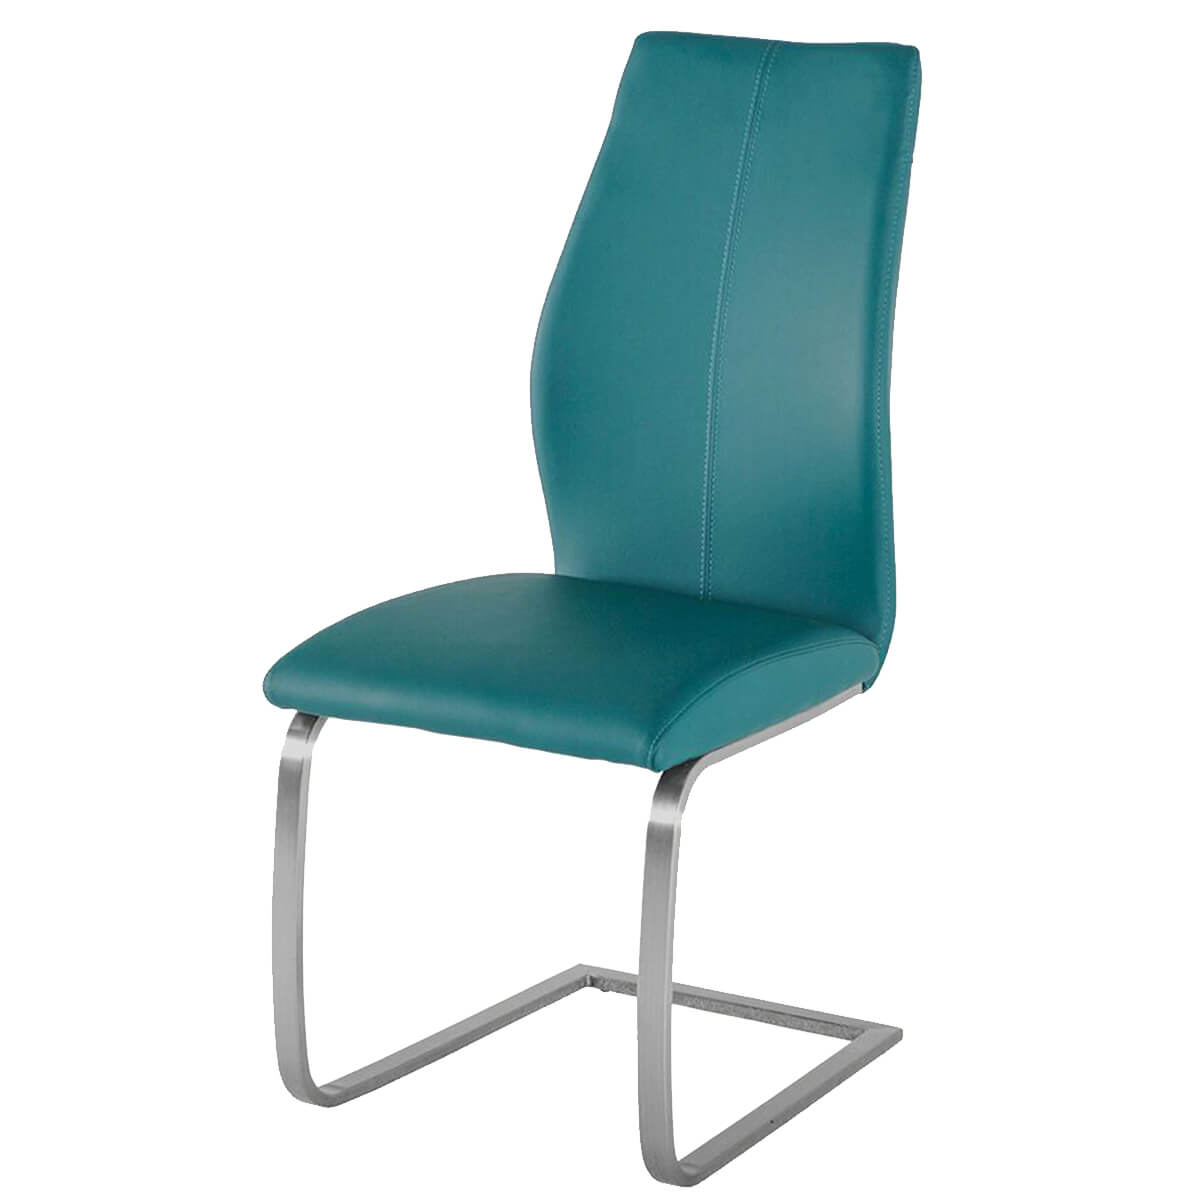 Irma Multi Coloured Chairs Teal Faux Leather Dining Chairs | FADS